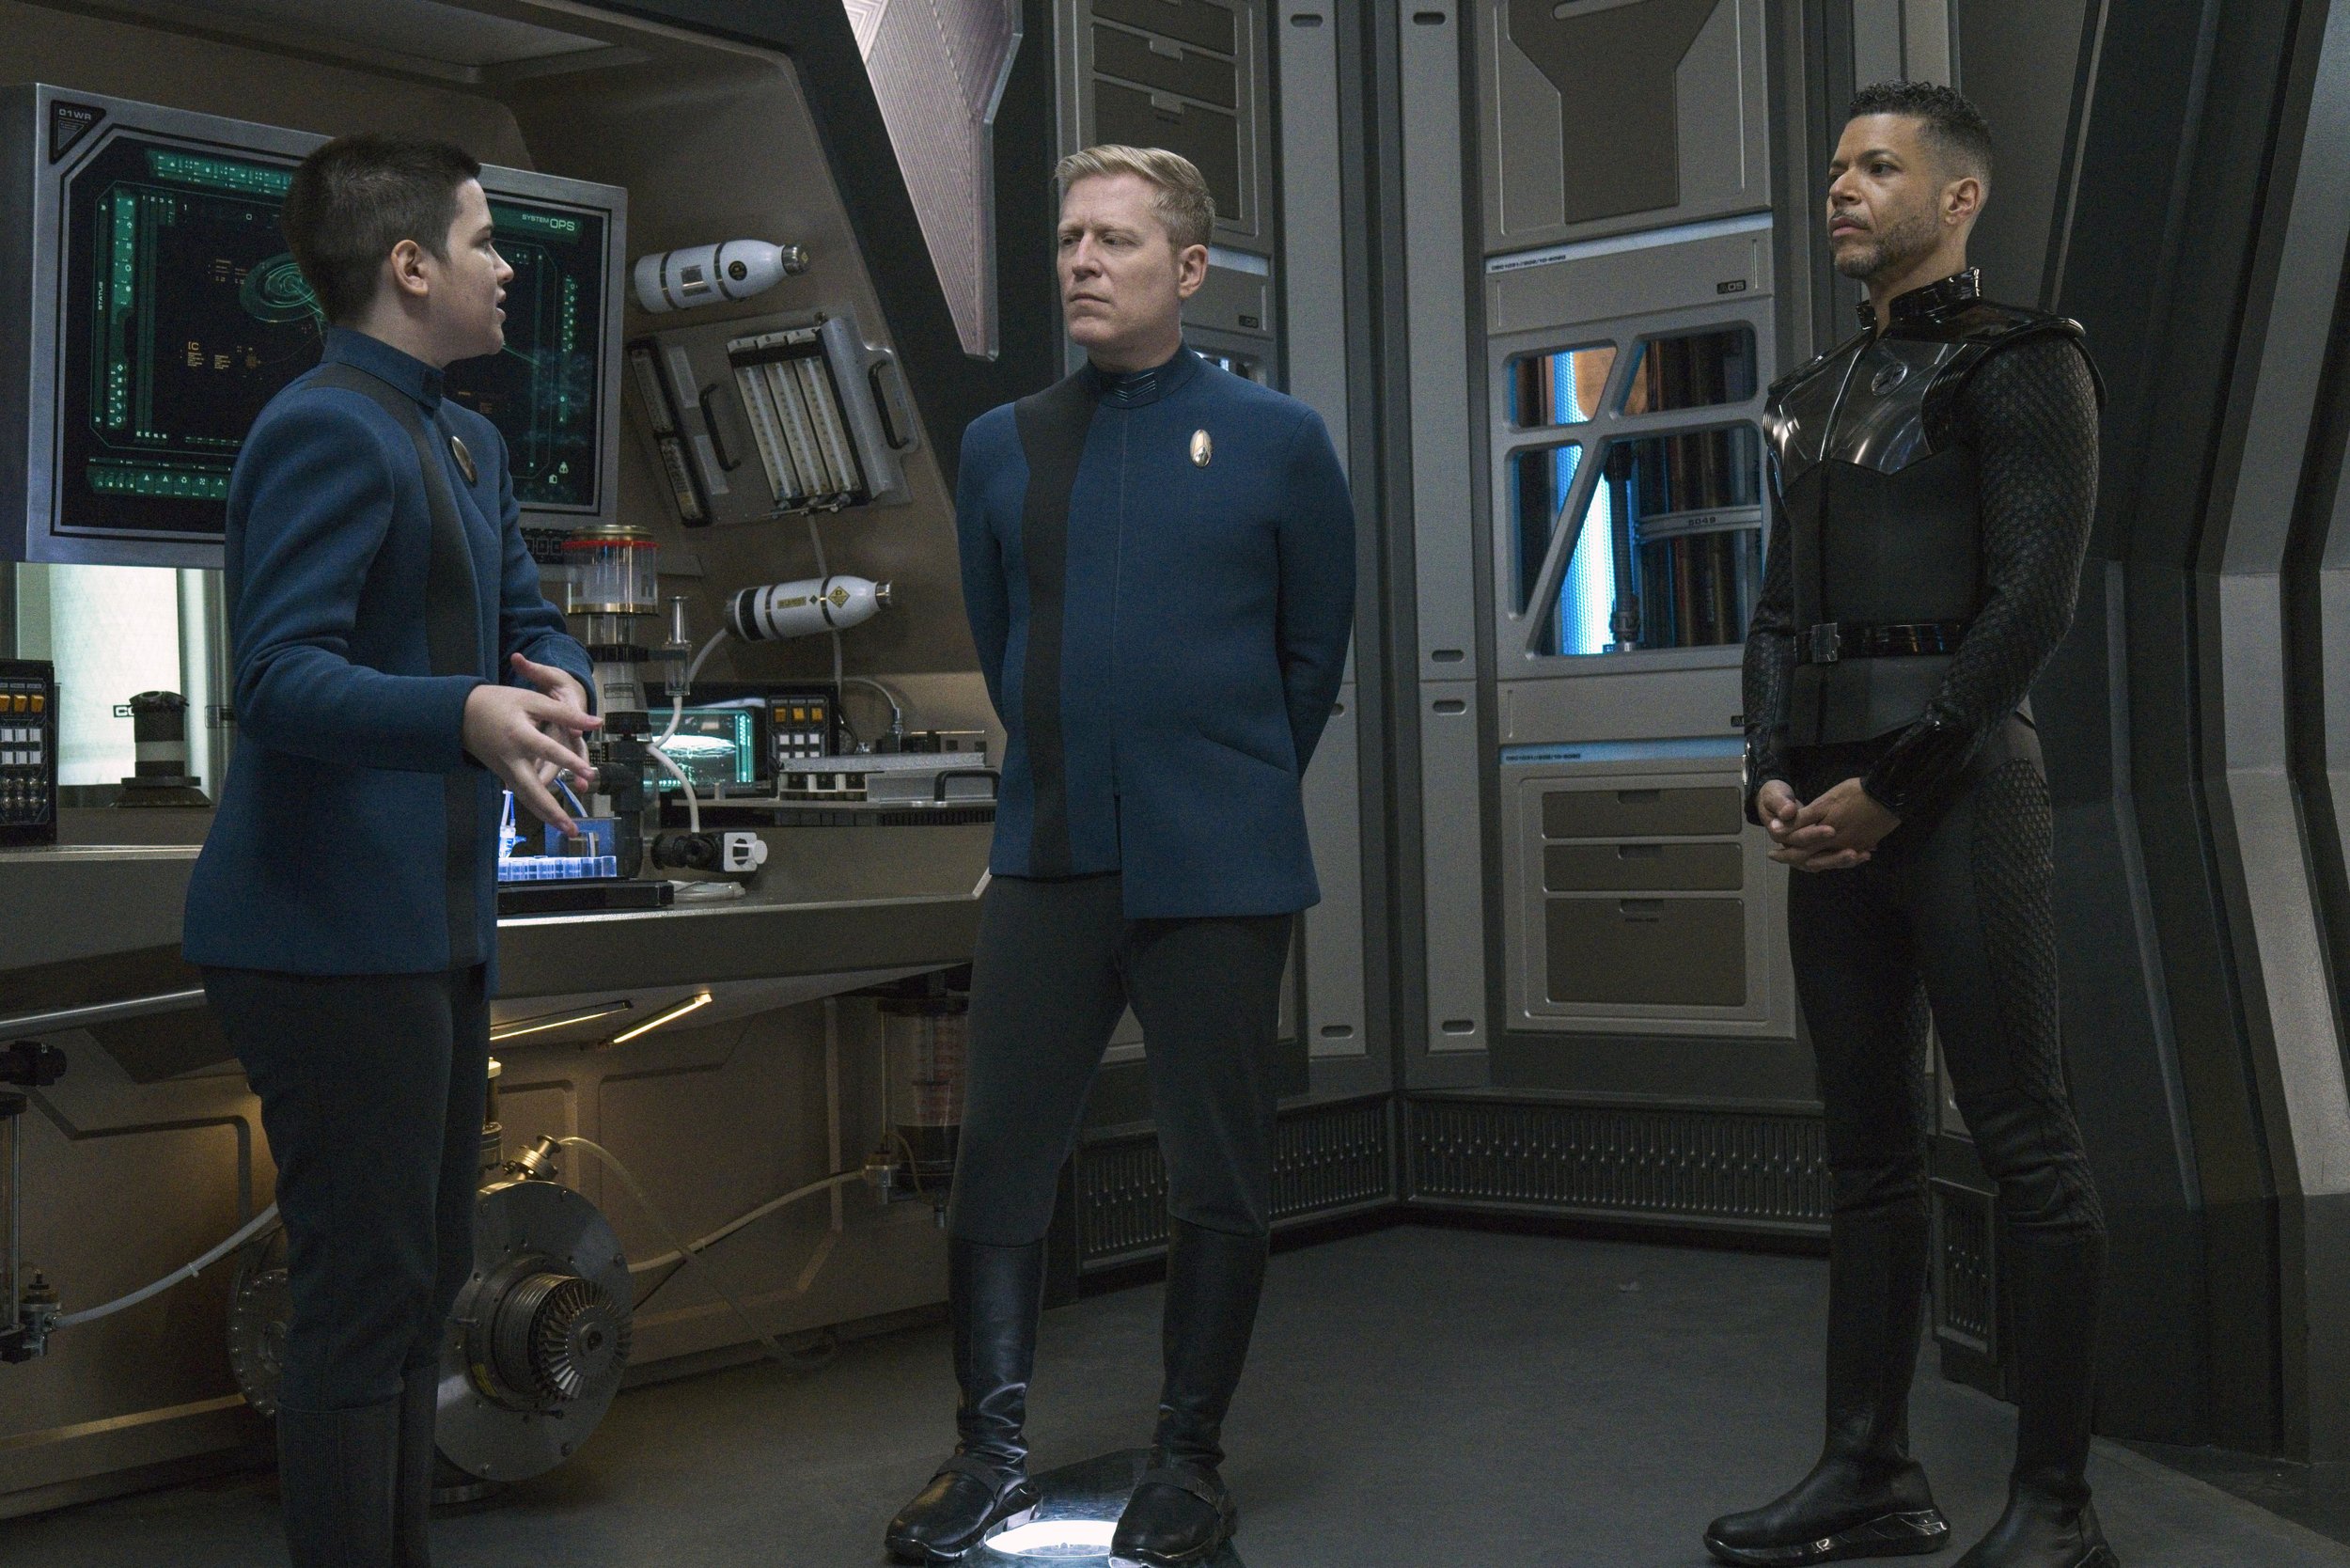   Pictured: Blu del Barrio as Adira, Anthony Rapp as Stamets and Wilson Cruz as Culber of the Paramount+ original series STAR TREK: DISCOVERY. Photo Cr: Michael Gibson/Paramount+ (C) 2021 CBS Interactive. All Rights Reserved.  